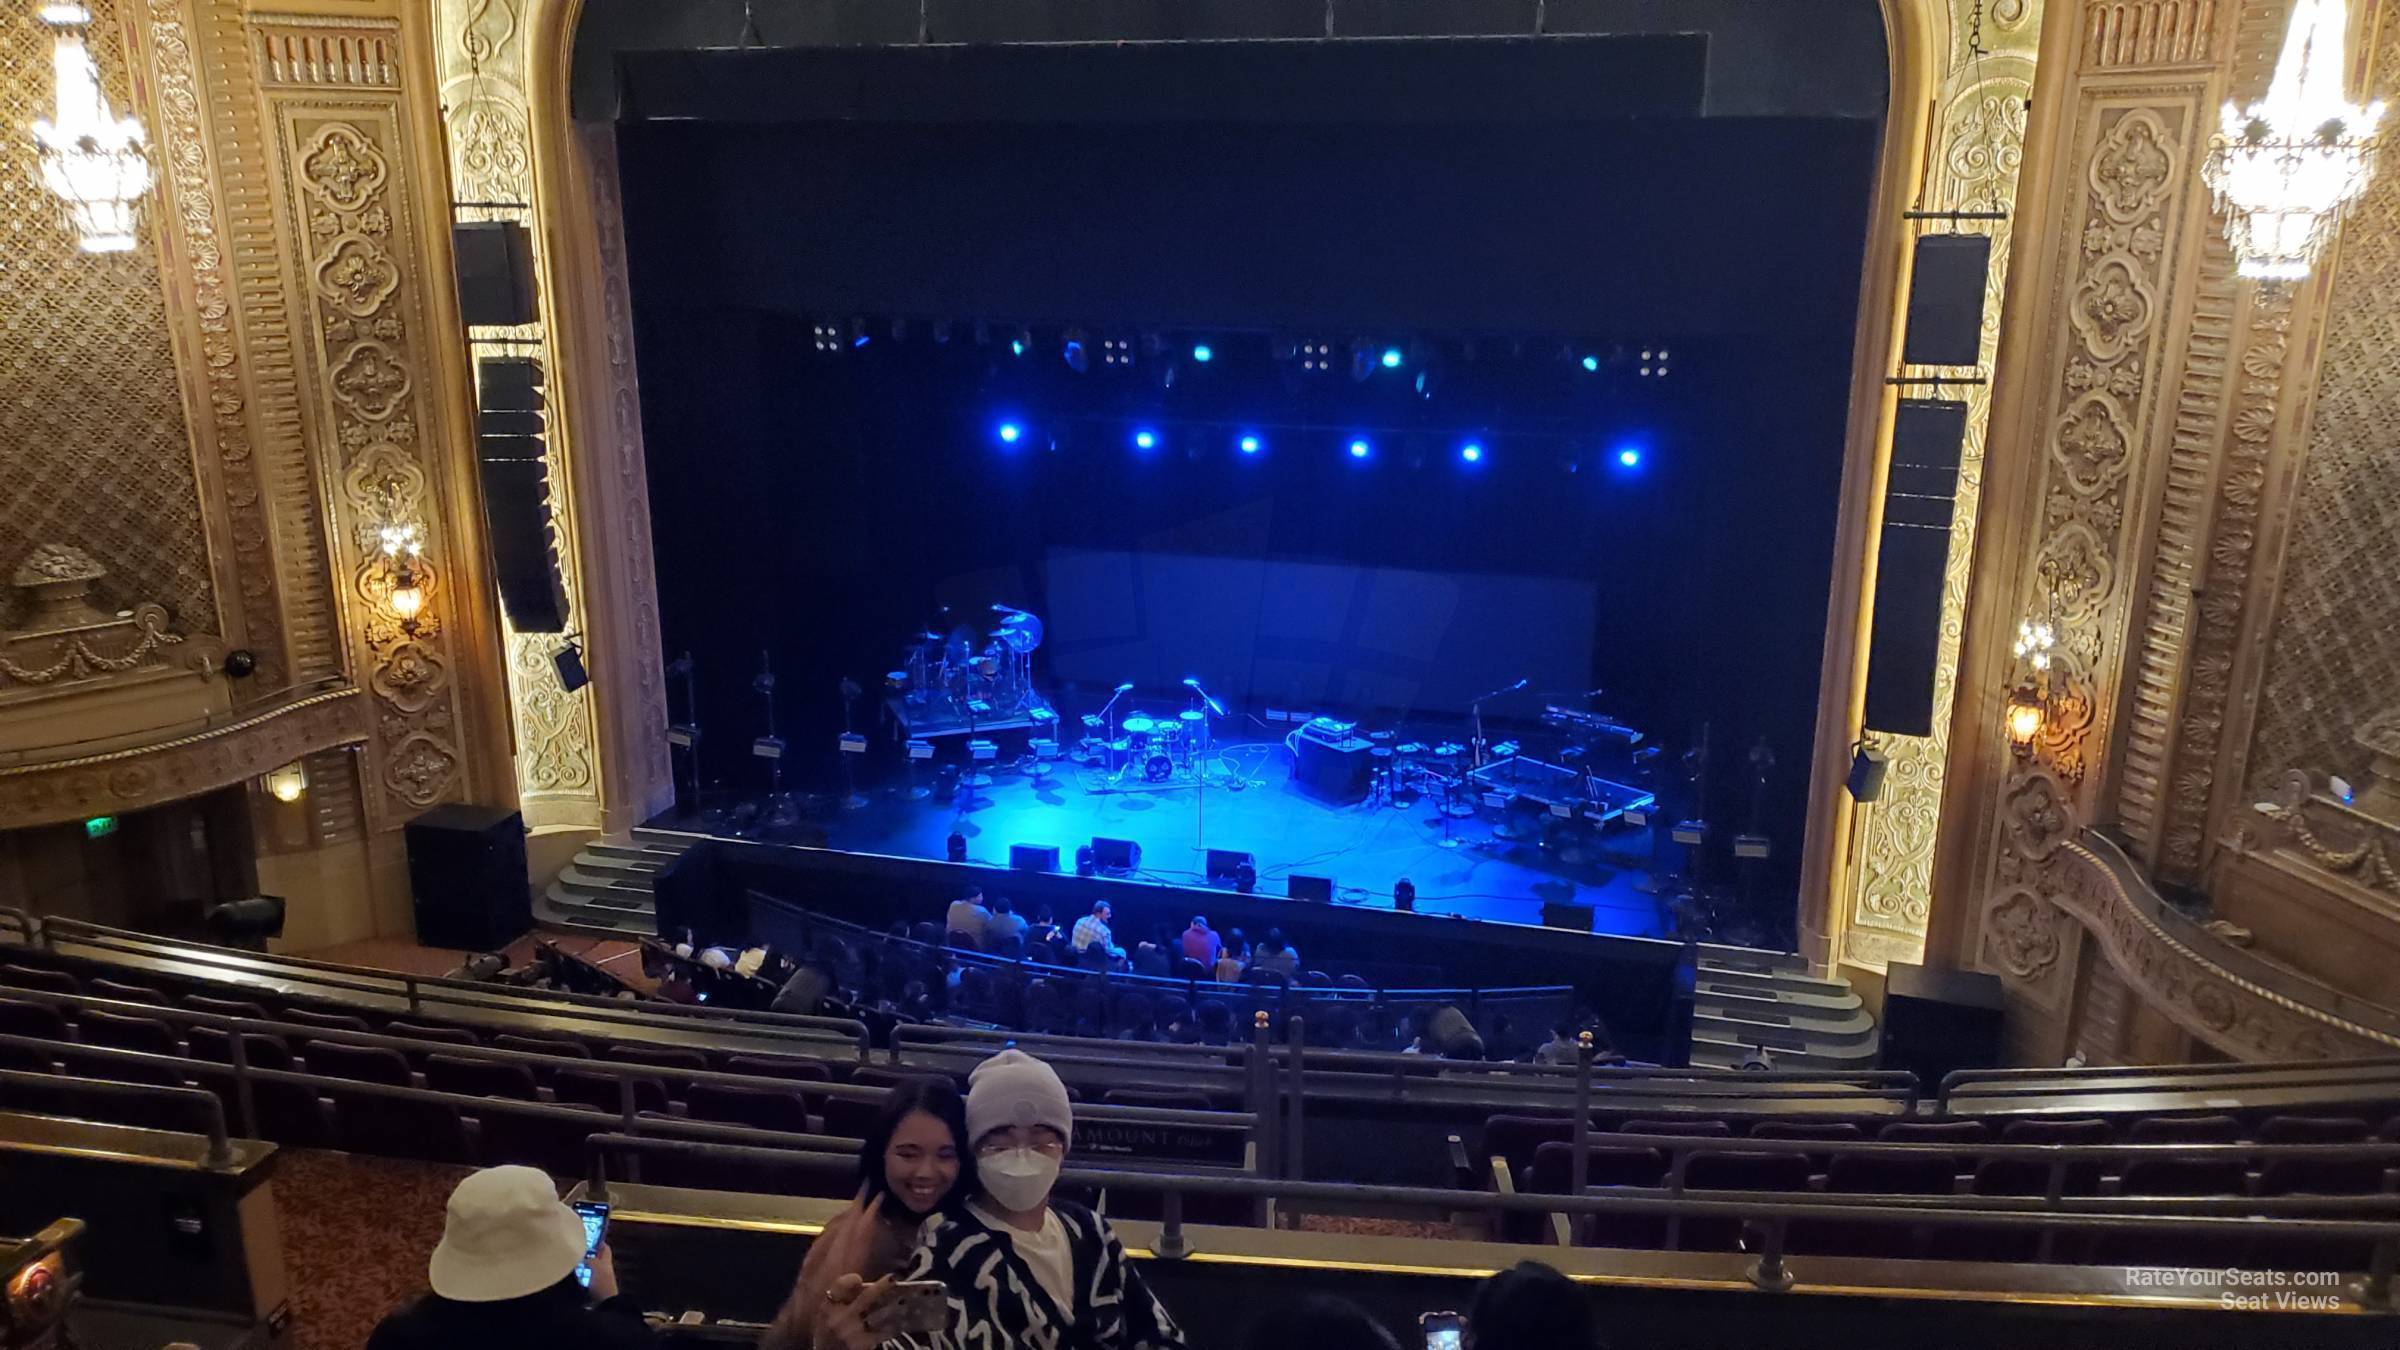 section 12, row f seat view  - paramount theatre - seattle